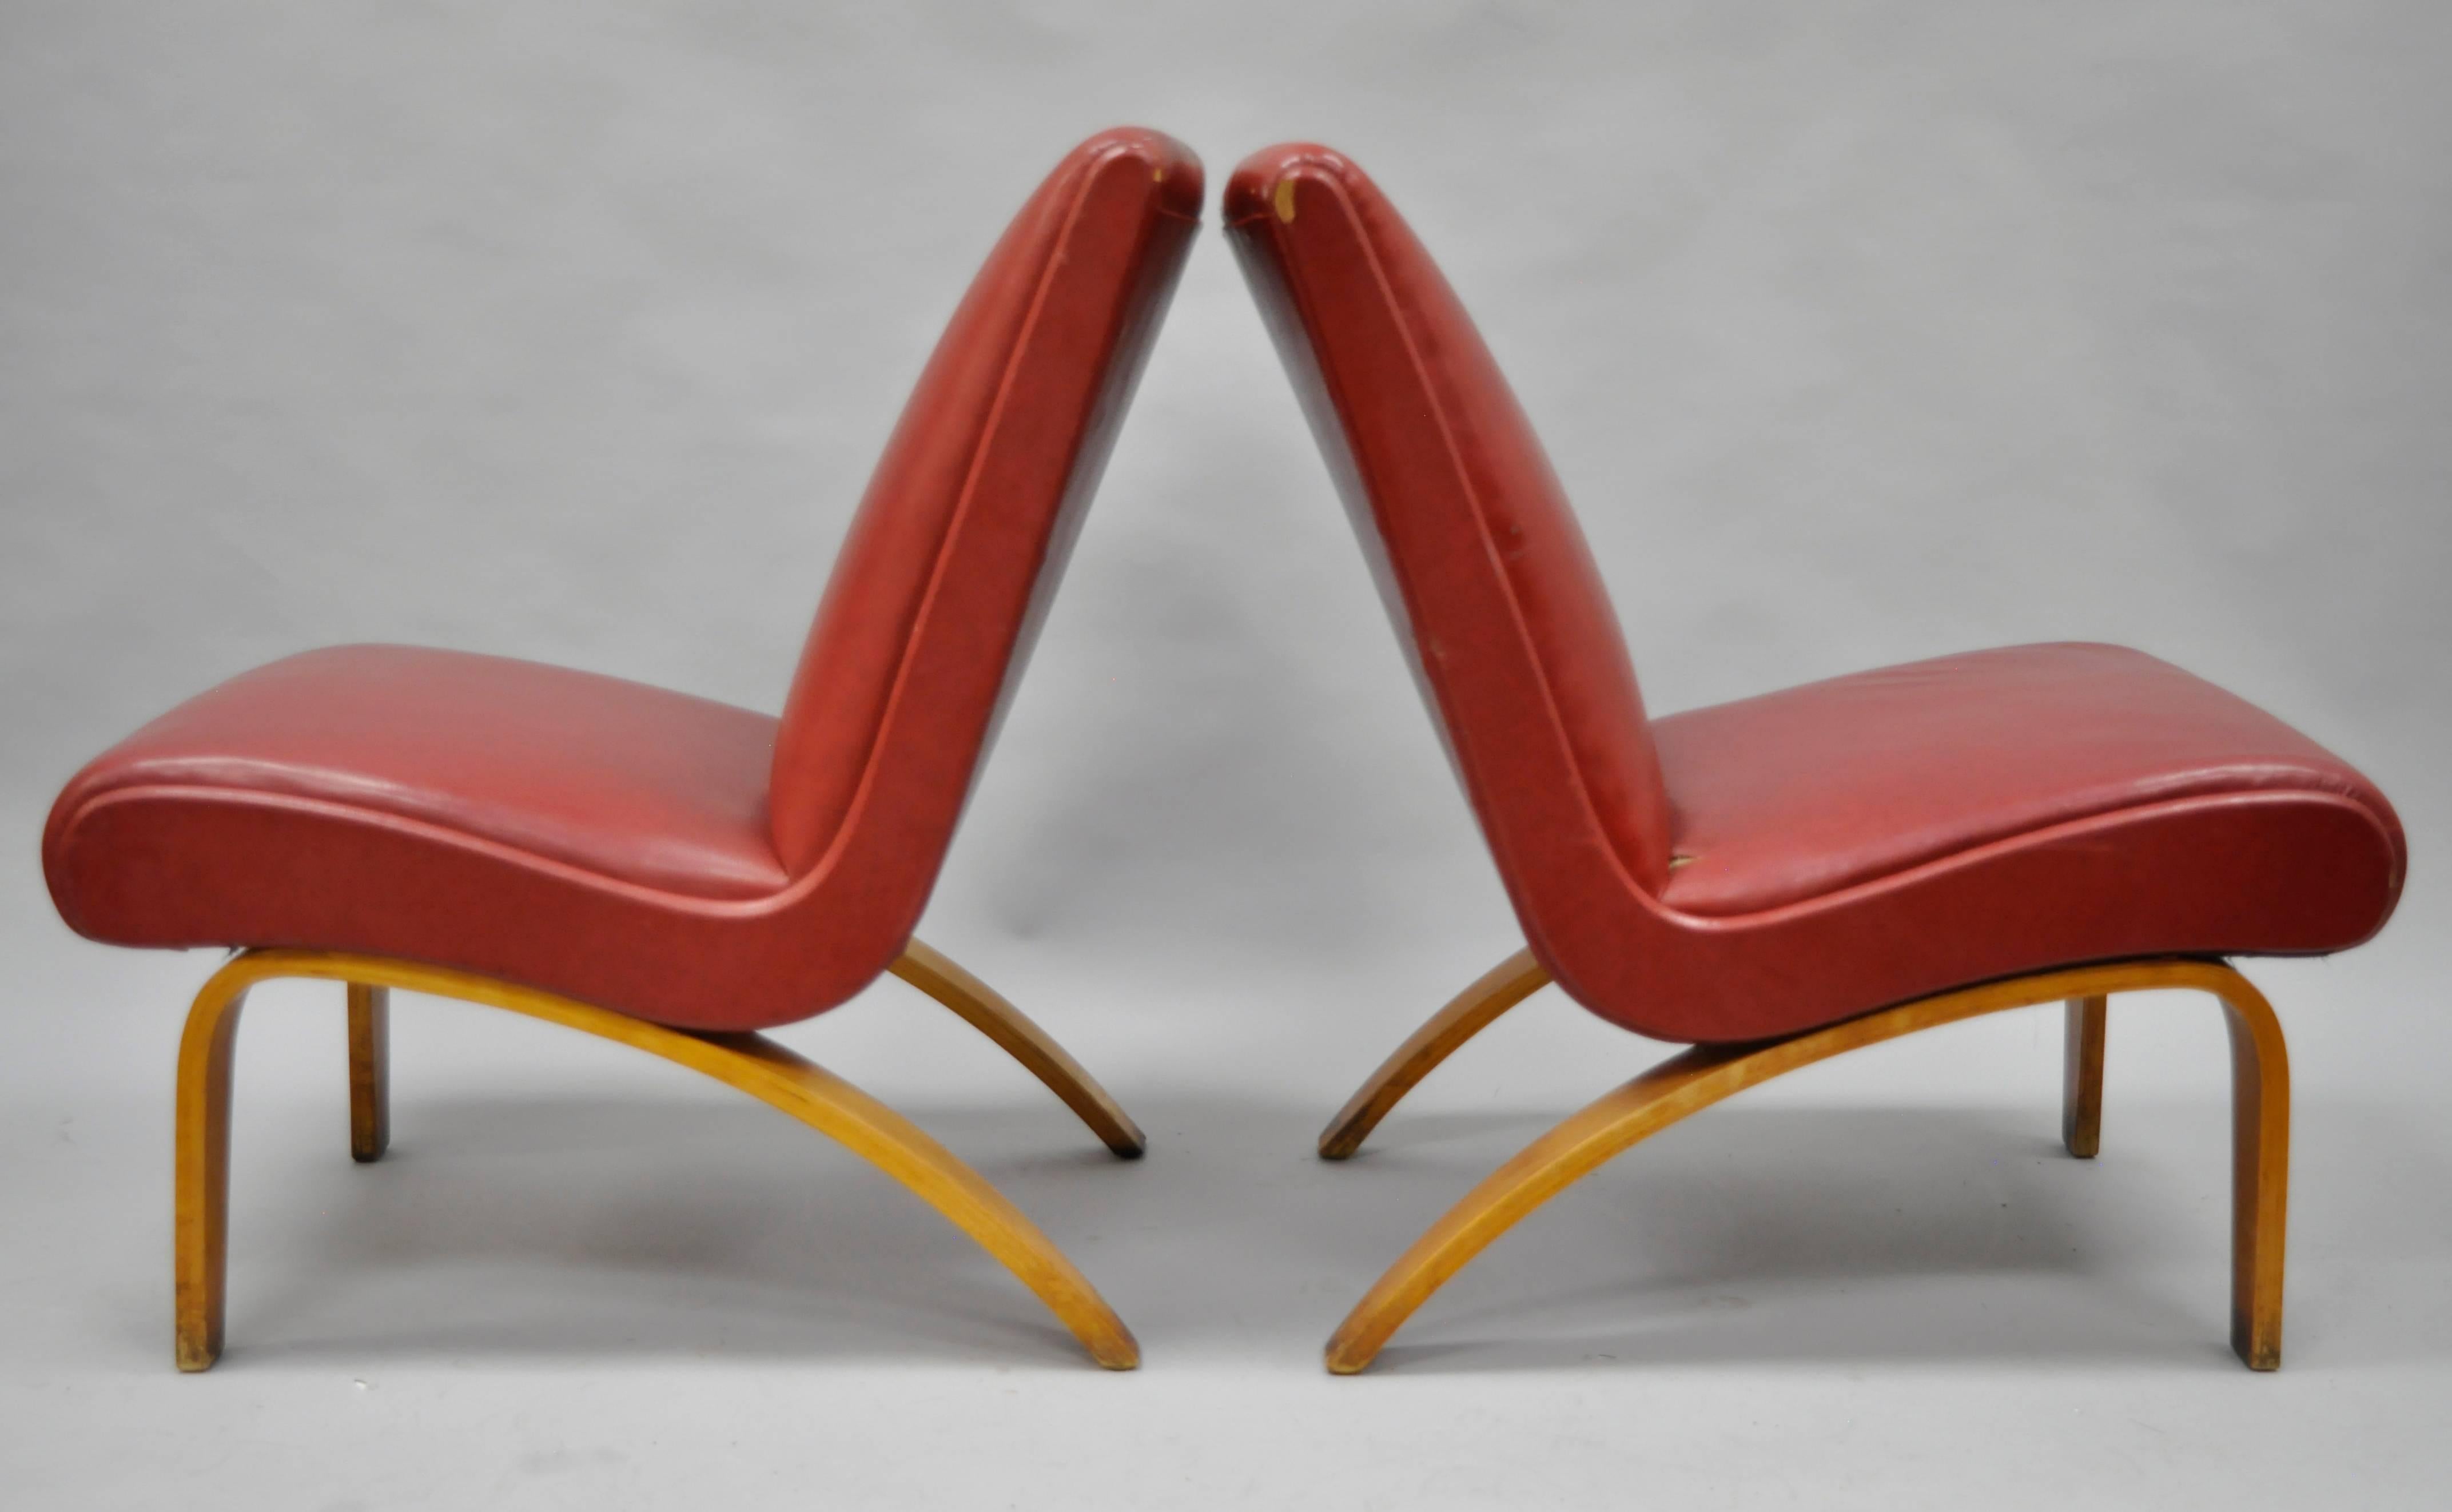 Very rare pair of Mid-Century Modern bentwood slipper lounge chairs by Thonet. Item features vinyl upholstery, original label, quality American craftsmanship, sleek sculptural form, laminated bentwood legs. Measurements: 32